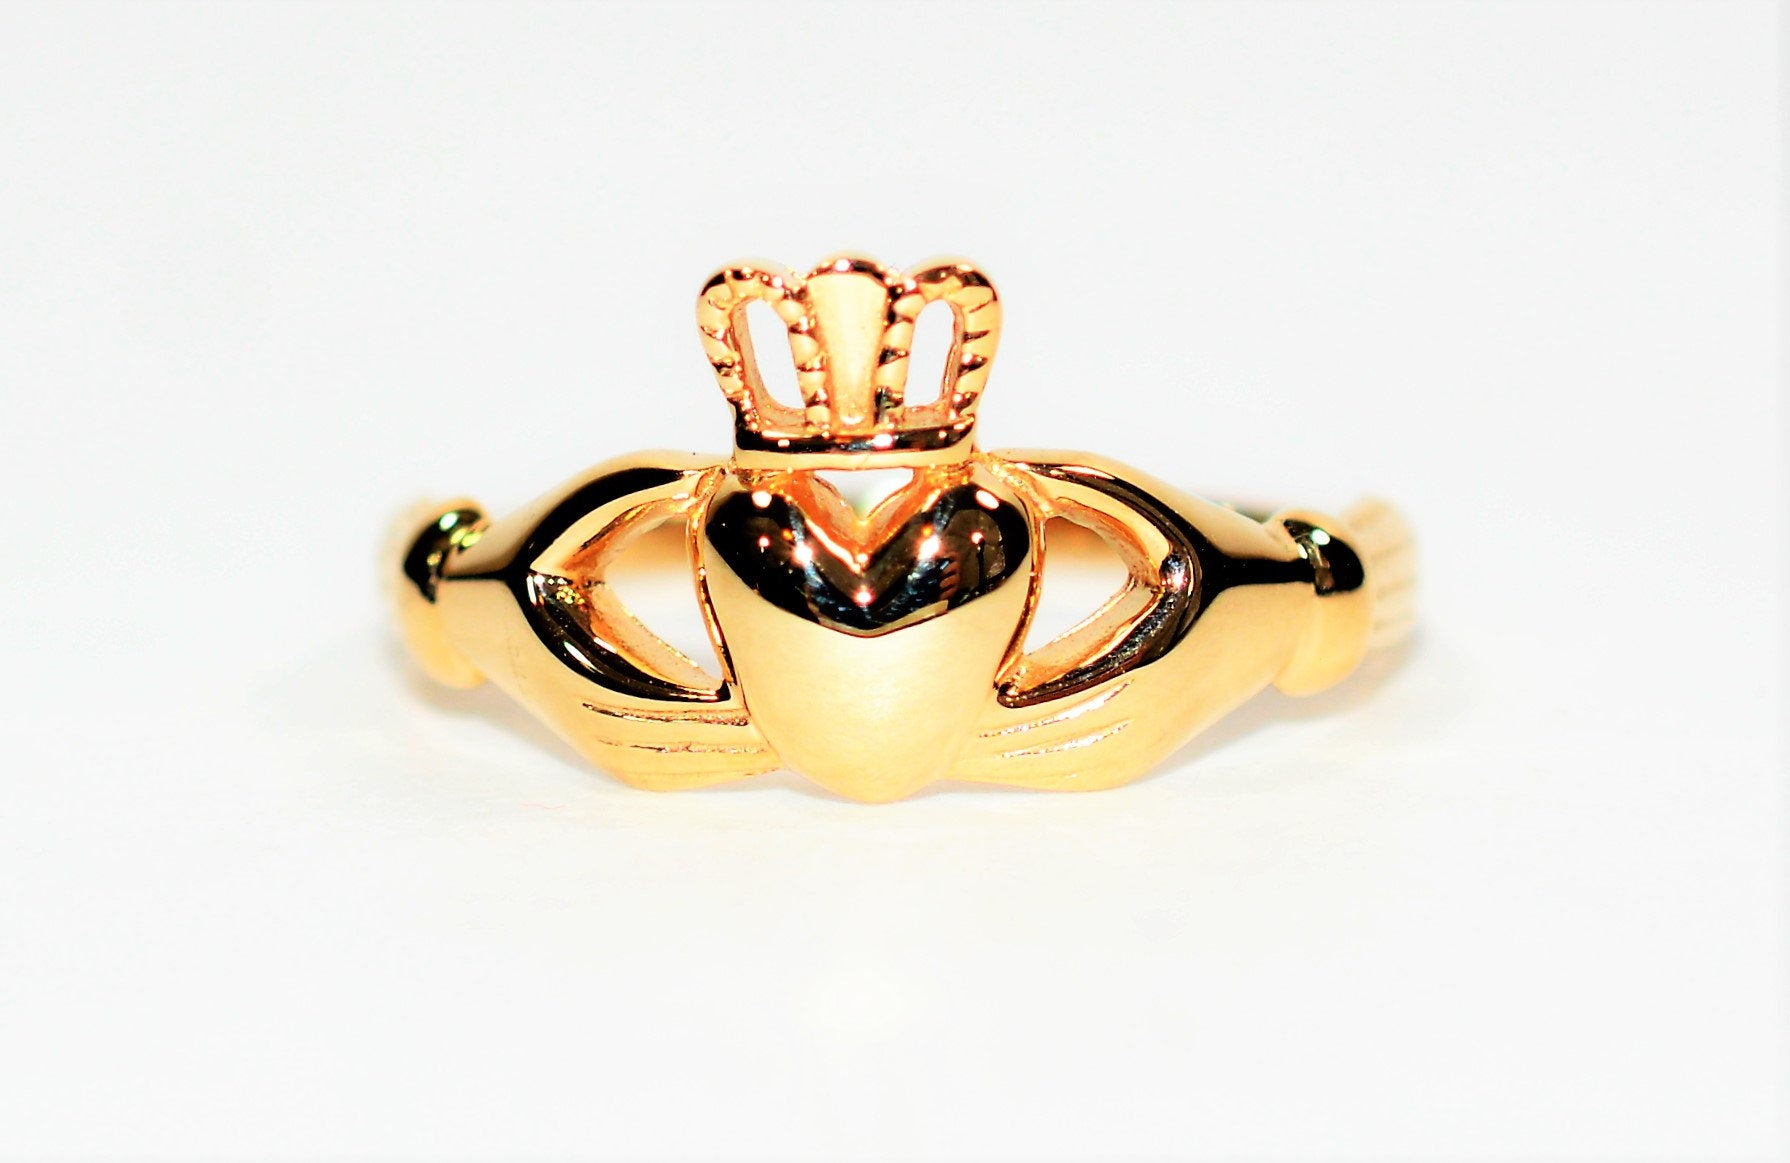 10K Solid Gold Claddagh Ring Heart Ring Celtic Ring Irish Ring Engagement Ring Promise Ring Romance Valentines Gift Fine Jewelry Jewellery